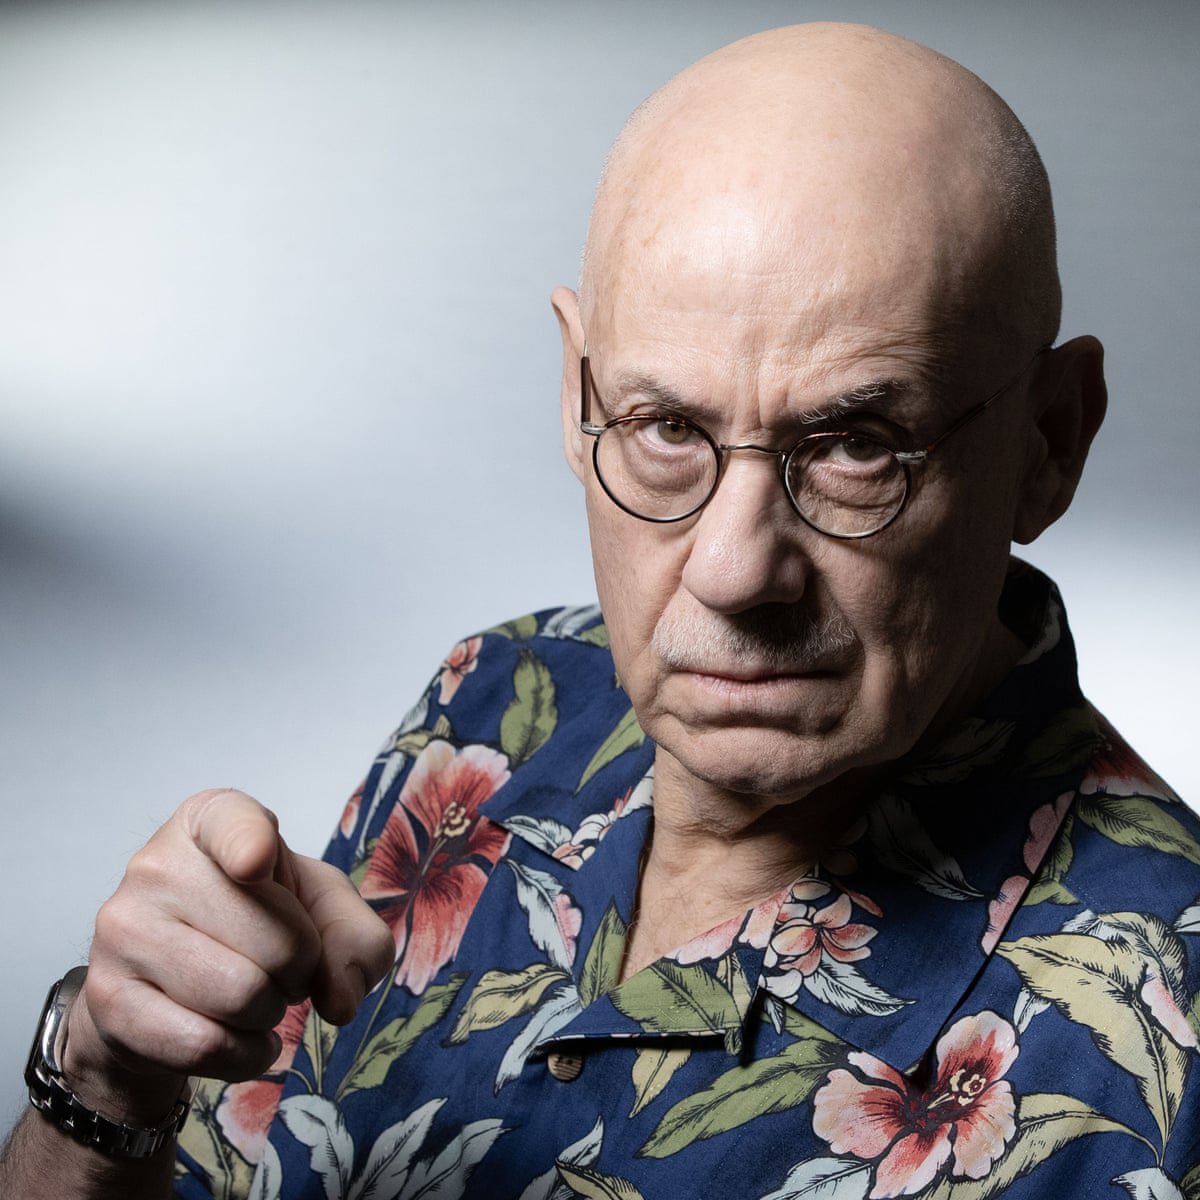 Will be spending nine months of my MA in the literary presence of this guy. I feel like I’m on fire in my mind. Can’t fucking wait. #jamesellroy